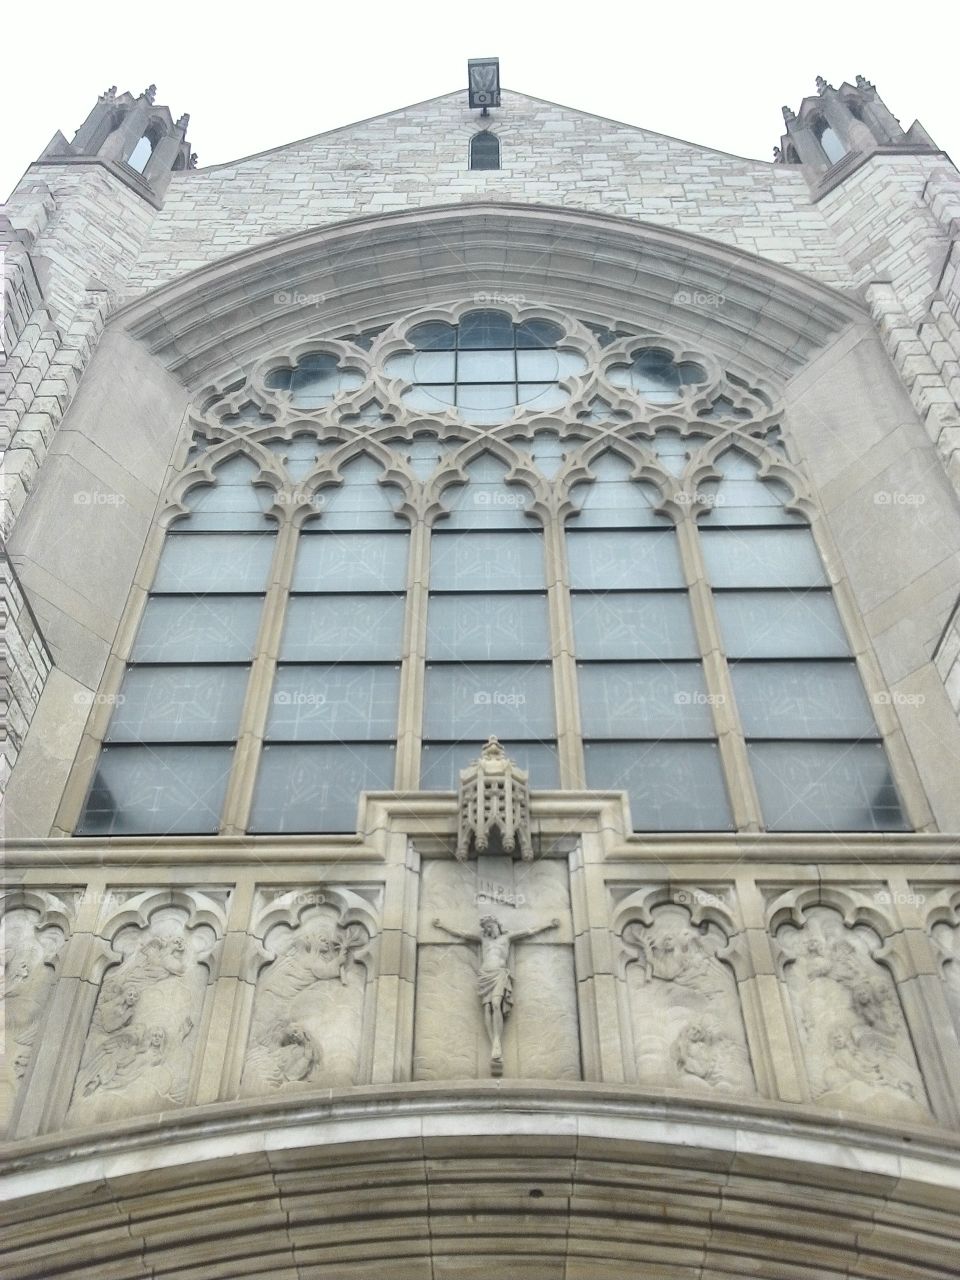 Cathedral entrance. the front doors